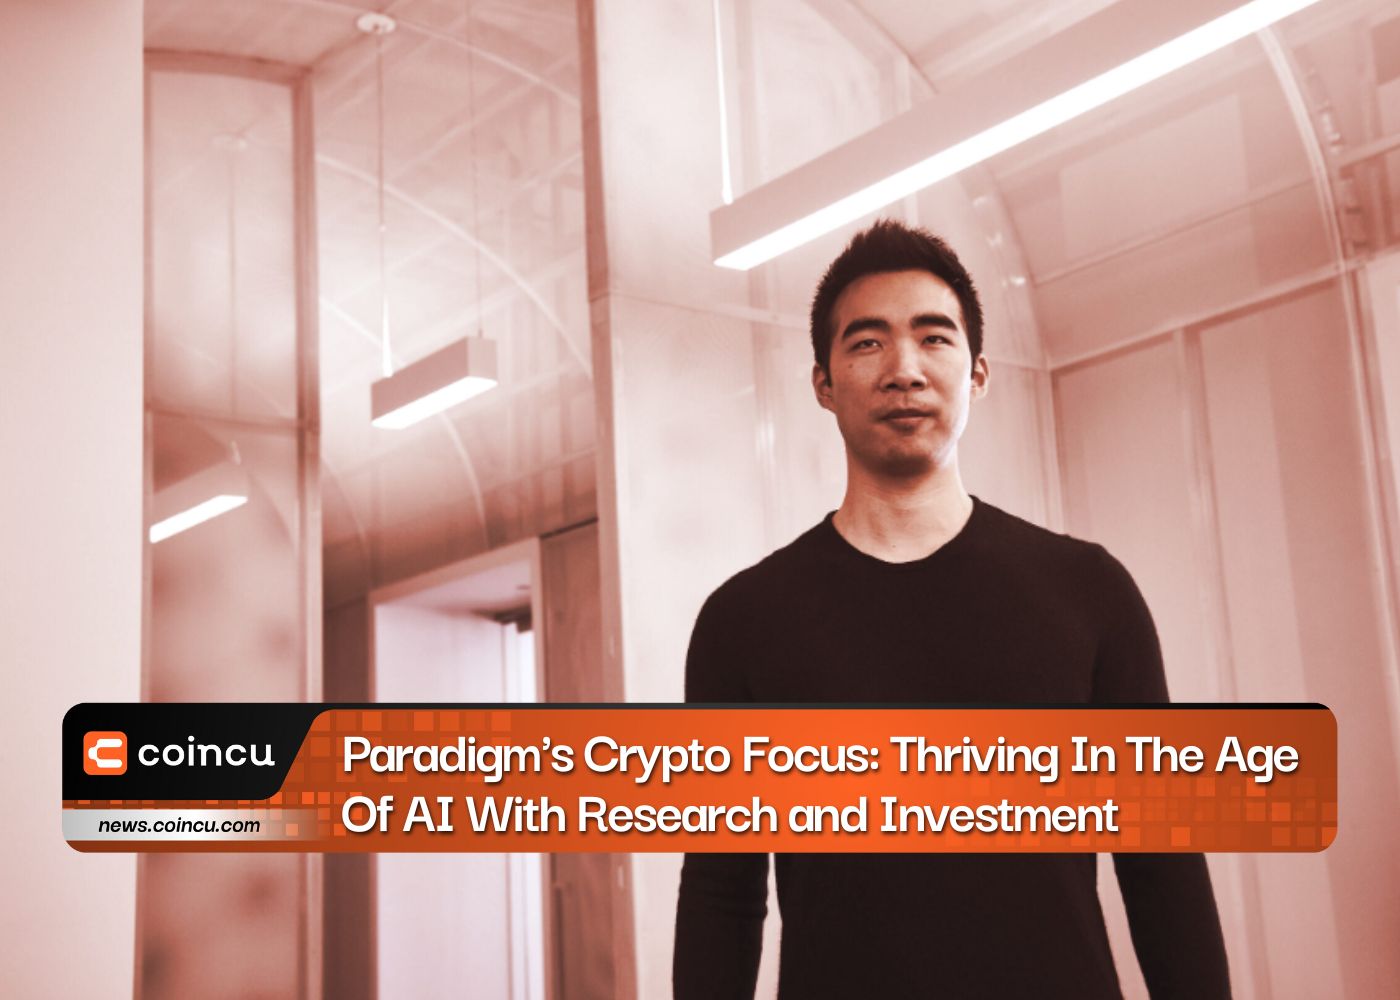 Paradigm's Crypto Focus: Thriving In The Age Of AI With Research and Investment